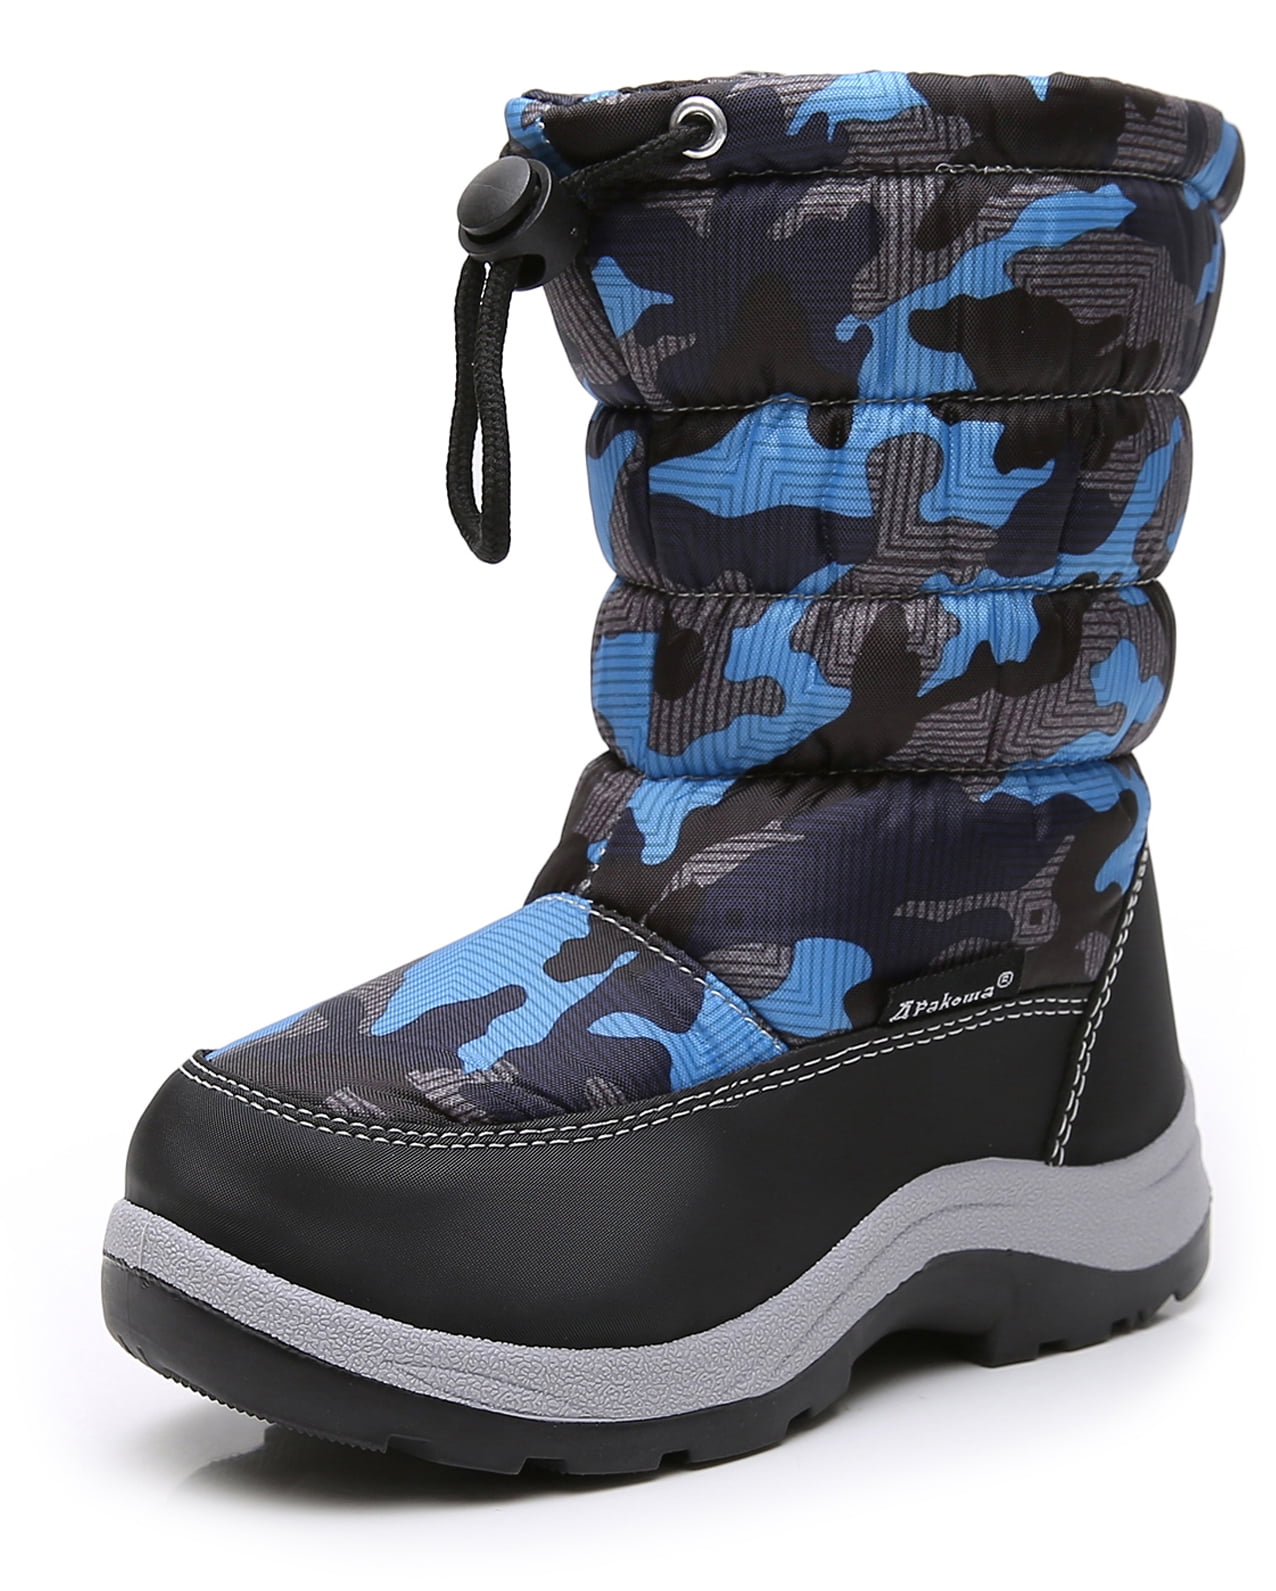 Apakowa Kid's Boys Girls Cold Weather Snow Boots (Toddler/Little Kid ...